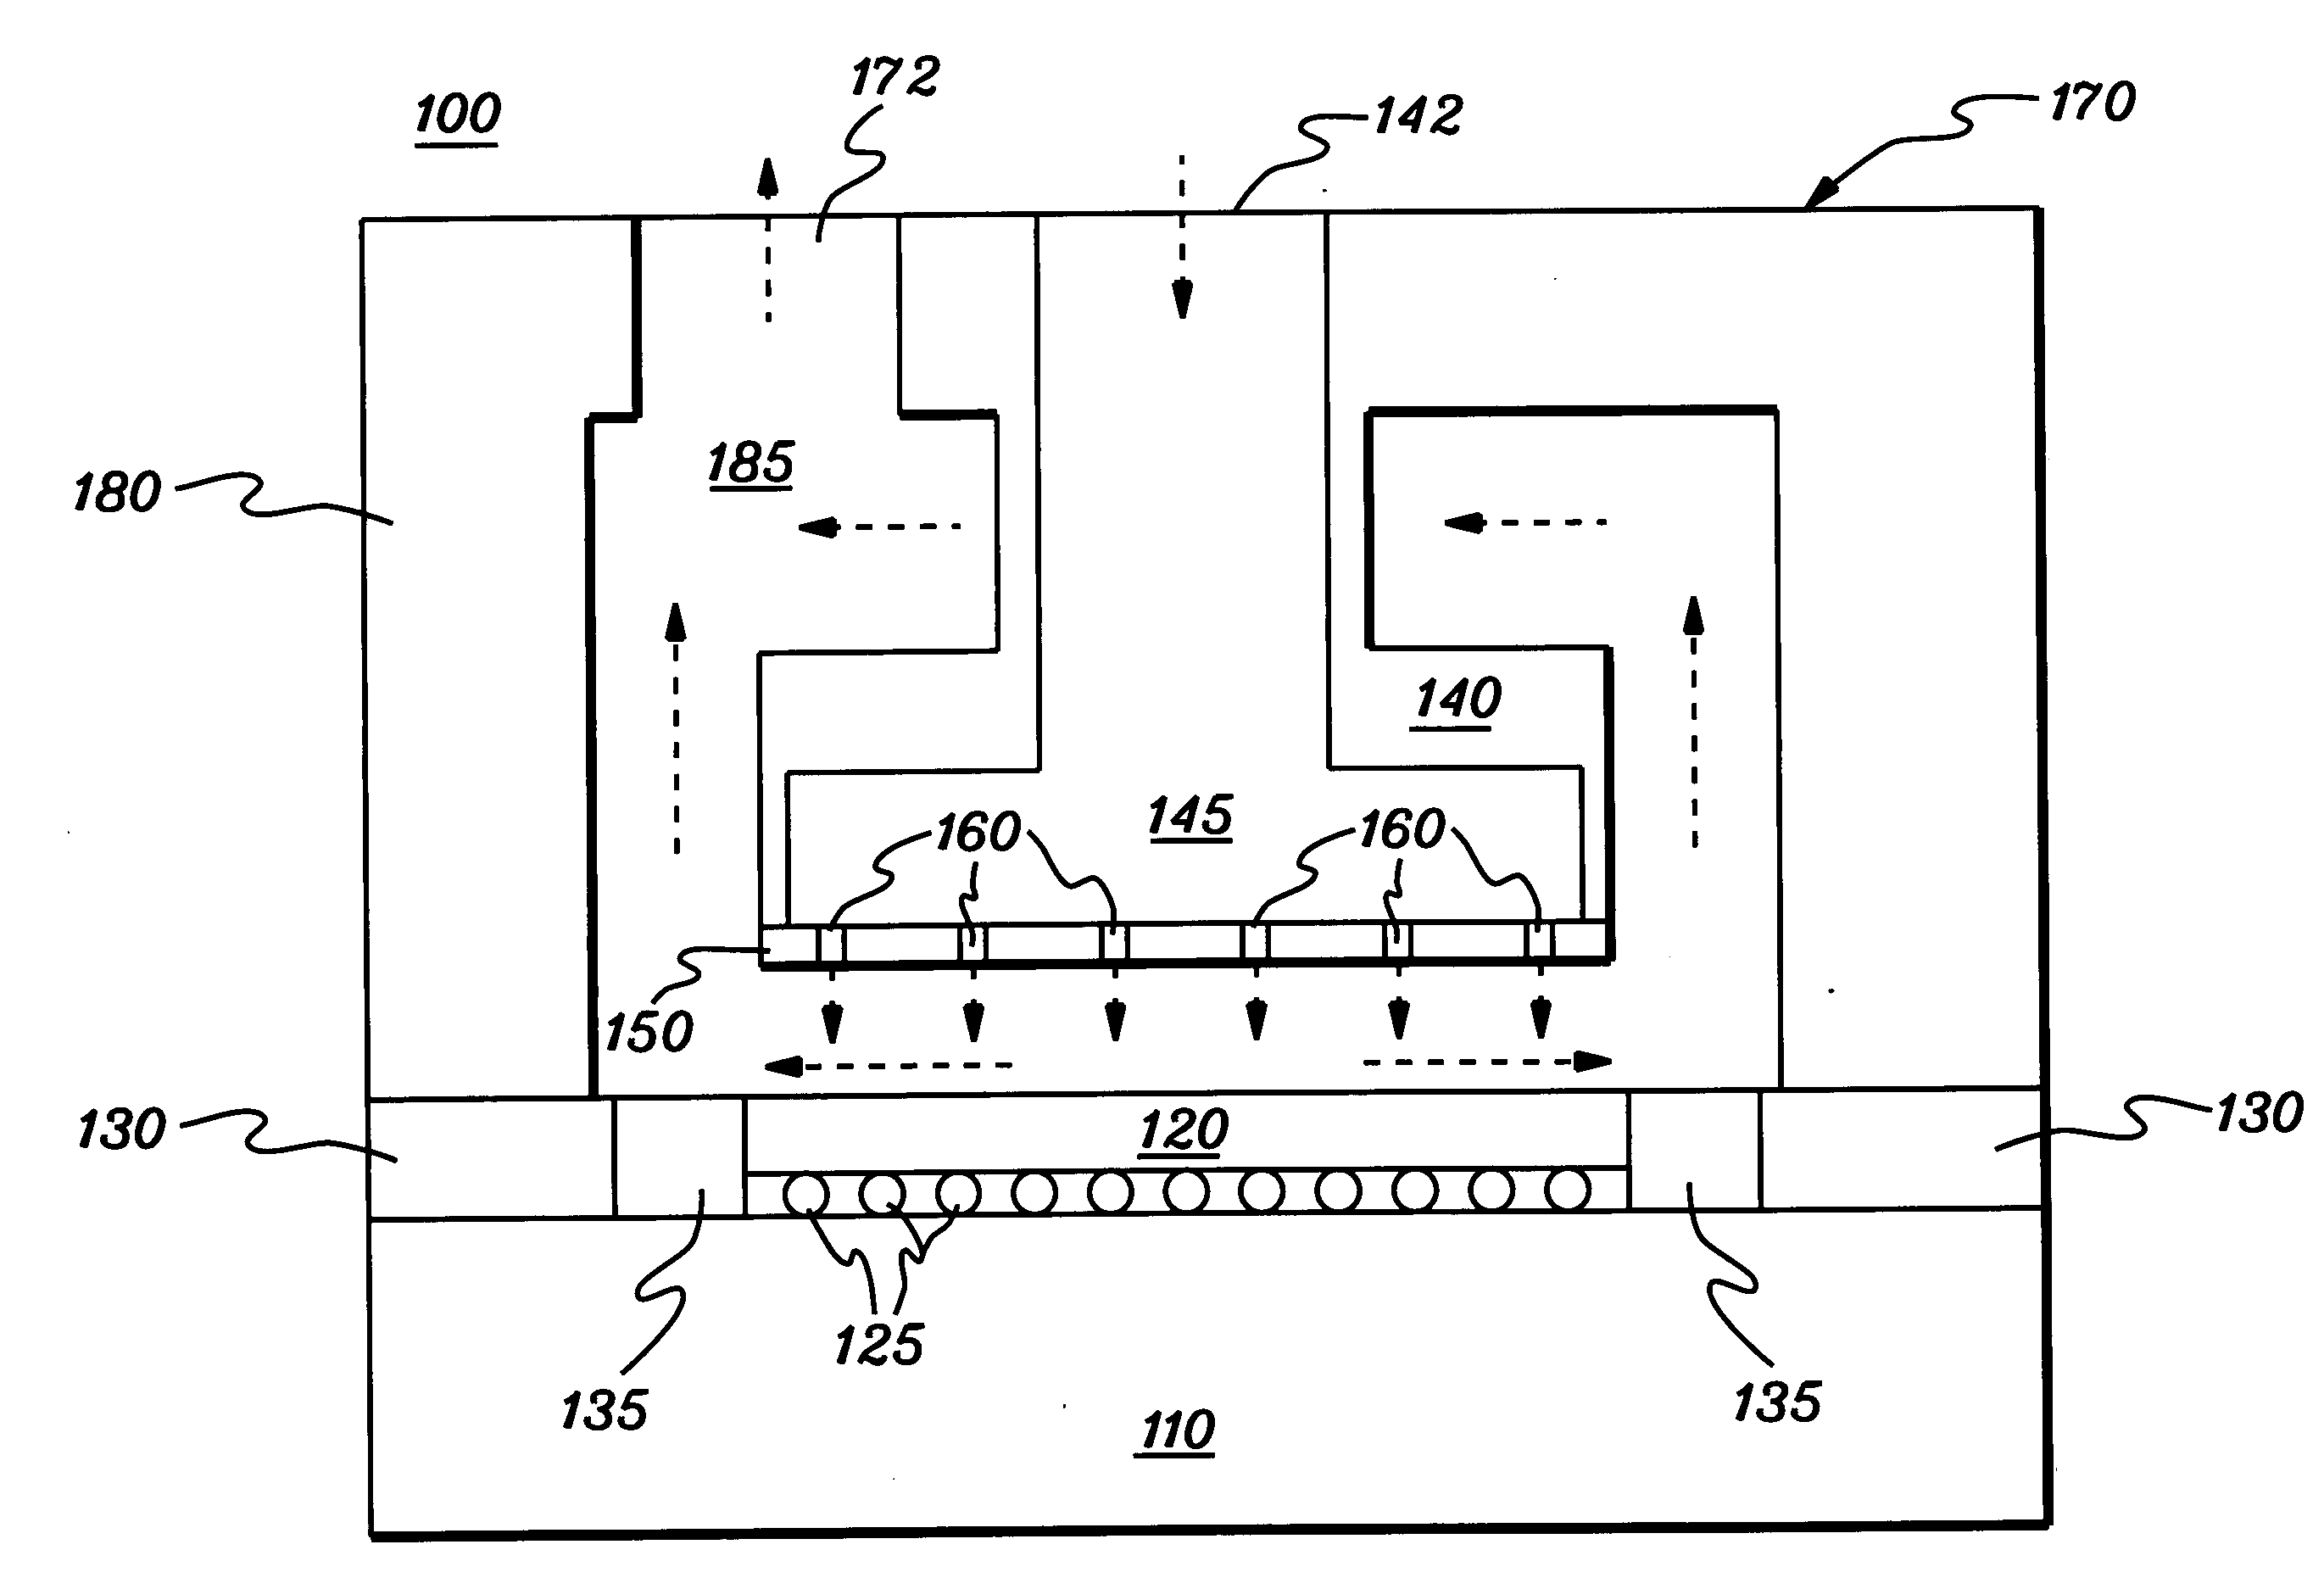 Cooling apparatus, cooled electronic module and methods of fabrication thereof employing an integrated coolant inlet and outlet manifold